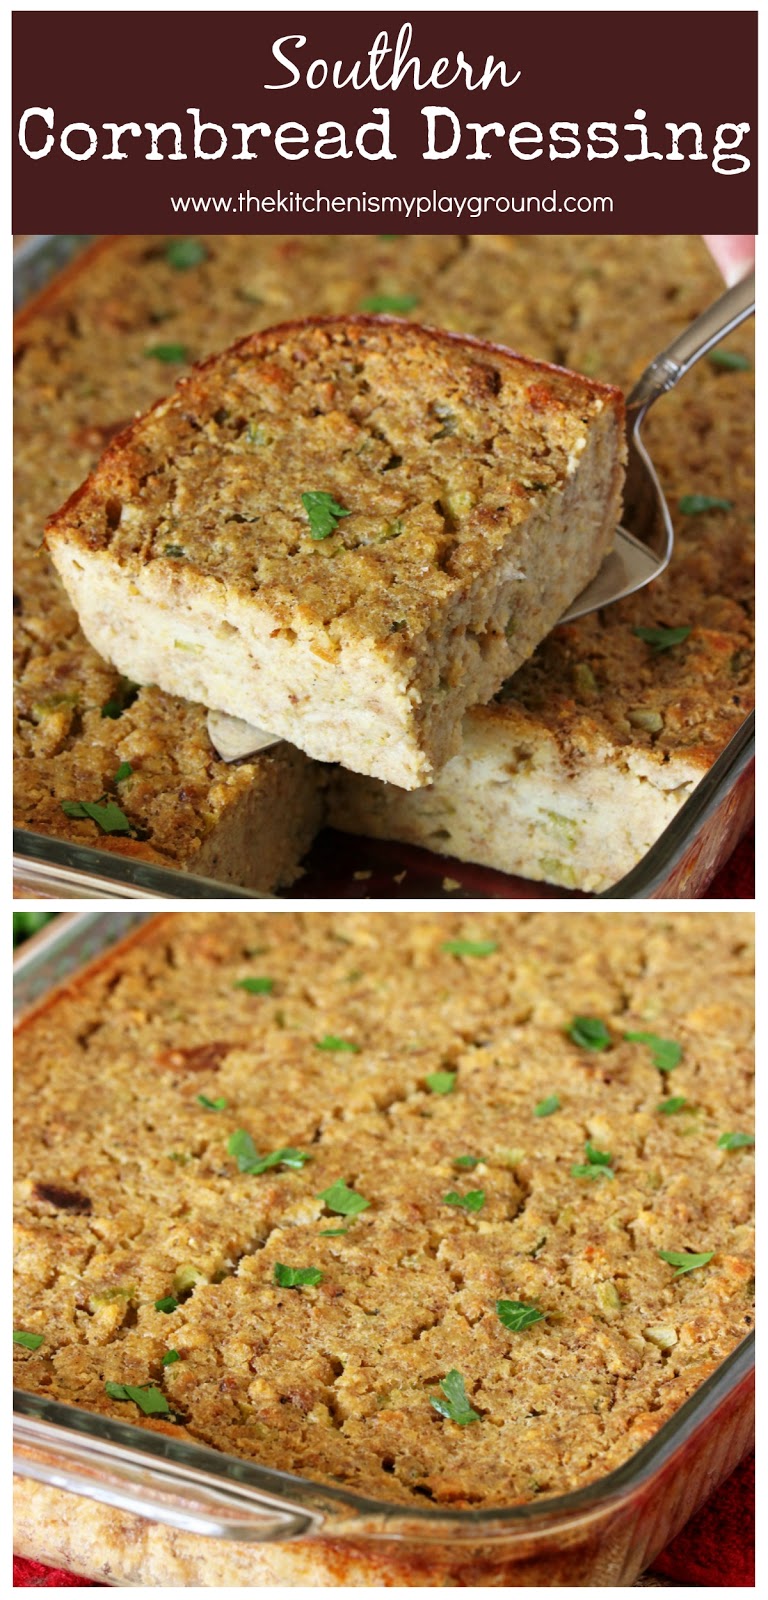 Southern Cornbread Dressing Recipe - Merry About Town